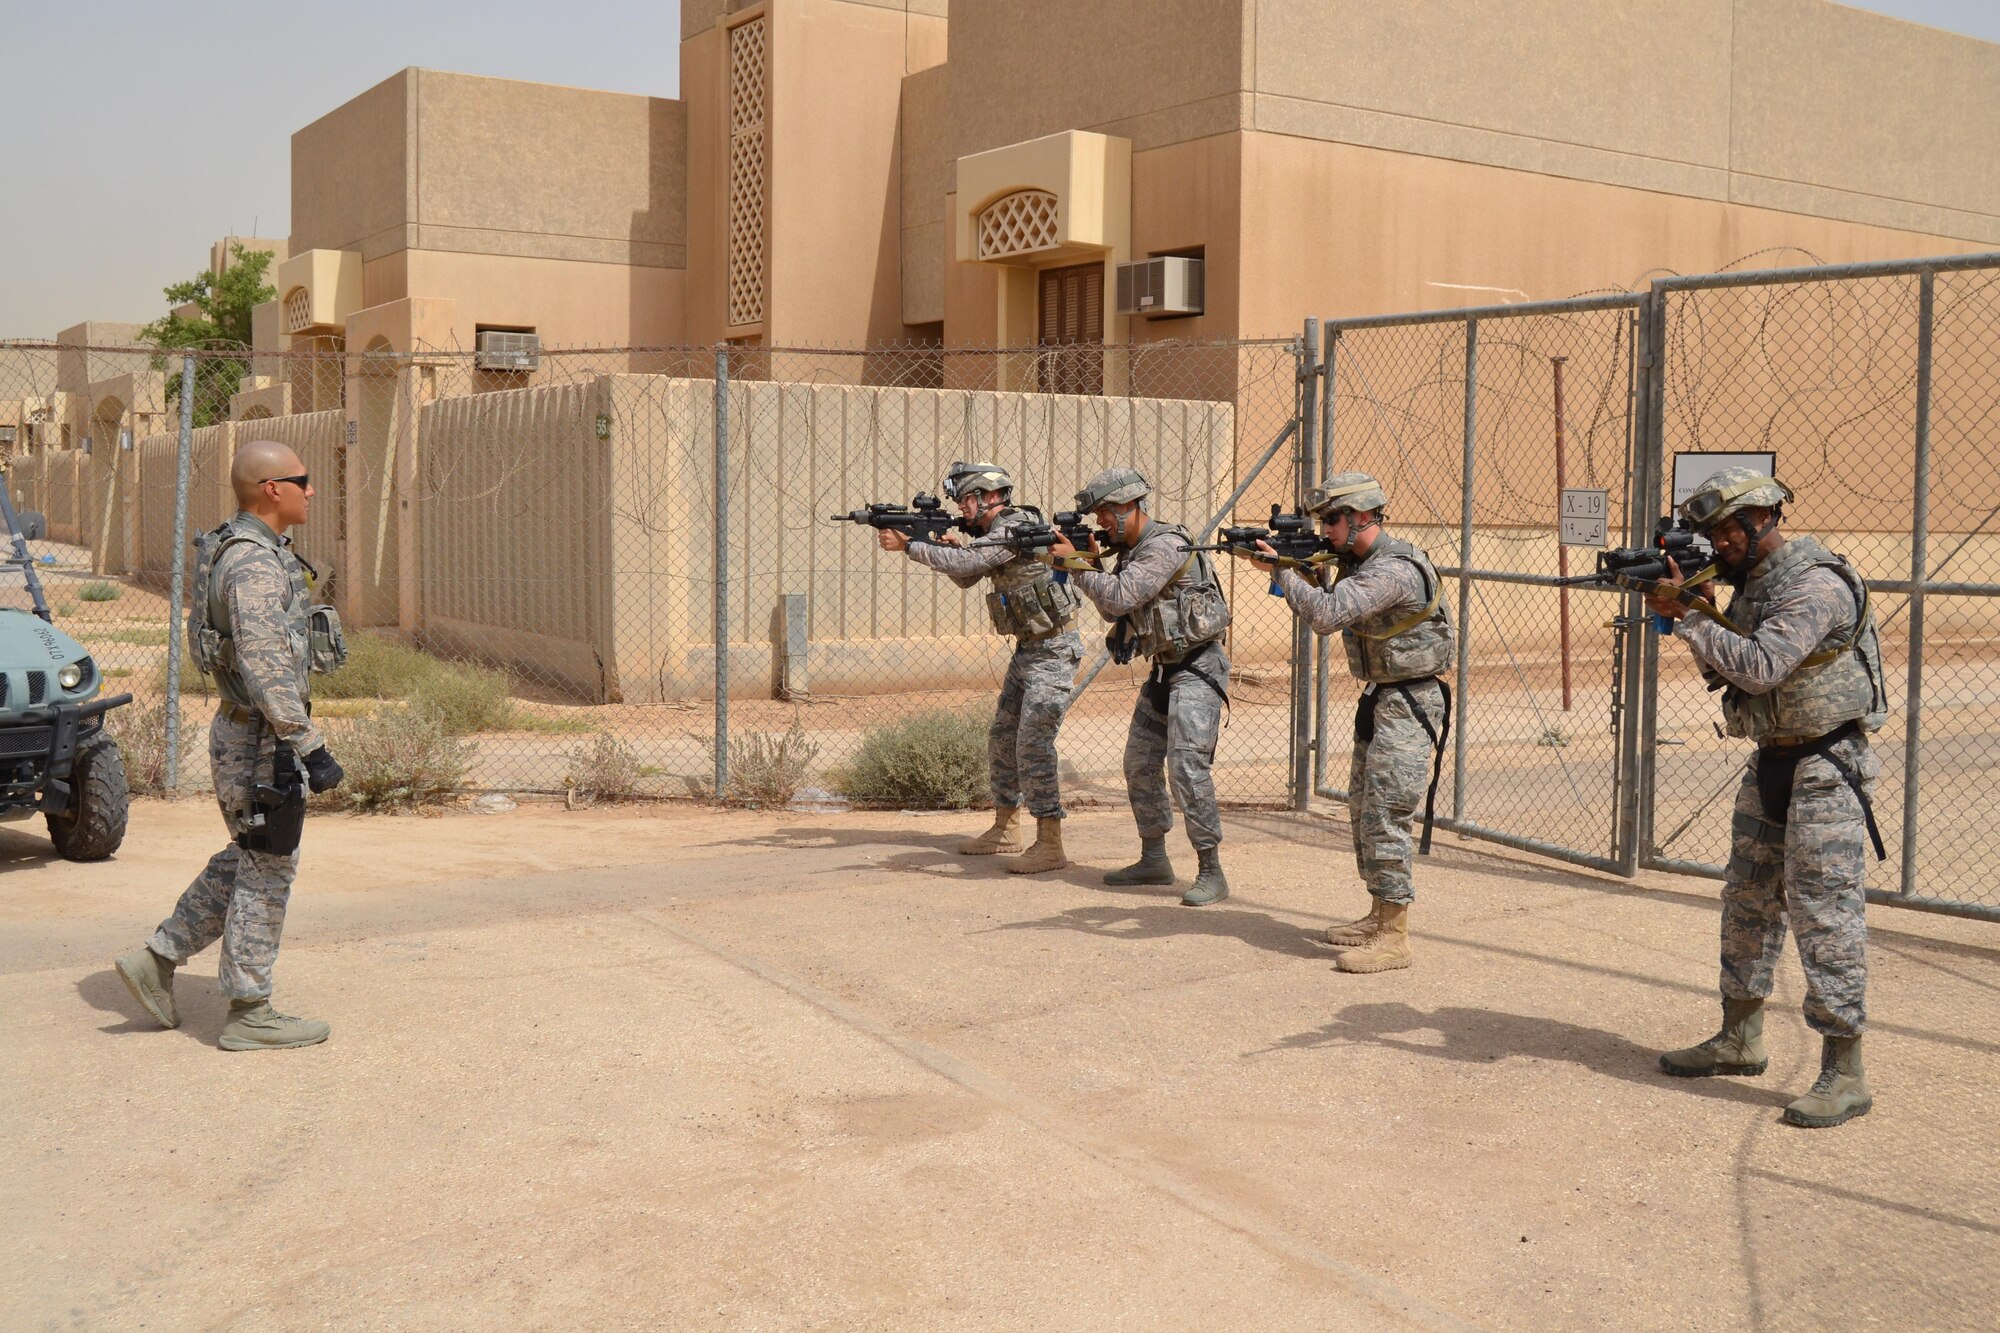 Airmen from the 879th Expeditionary Security Forces Squadron train active shooter neutralization tactics as part of the Air Force Central Command initiative  'Check Six' May 19, 2015 at Eskan Village, Saudi Arabia. Eskan Village is a housing community home to the United States military training mission to Saudi Arabia, a vital part of the strategic relationship between the United States and the Kingdom of Saudi Arabia. The 879th Expeditionary Security Forces Squadron is the 379th Air Expeditionary Wing's only geographically separated unit. (U.S. Air Force photo/ Senior Airman Kristopher Bennett)